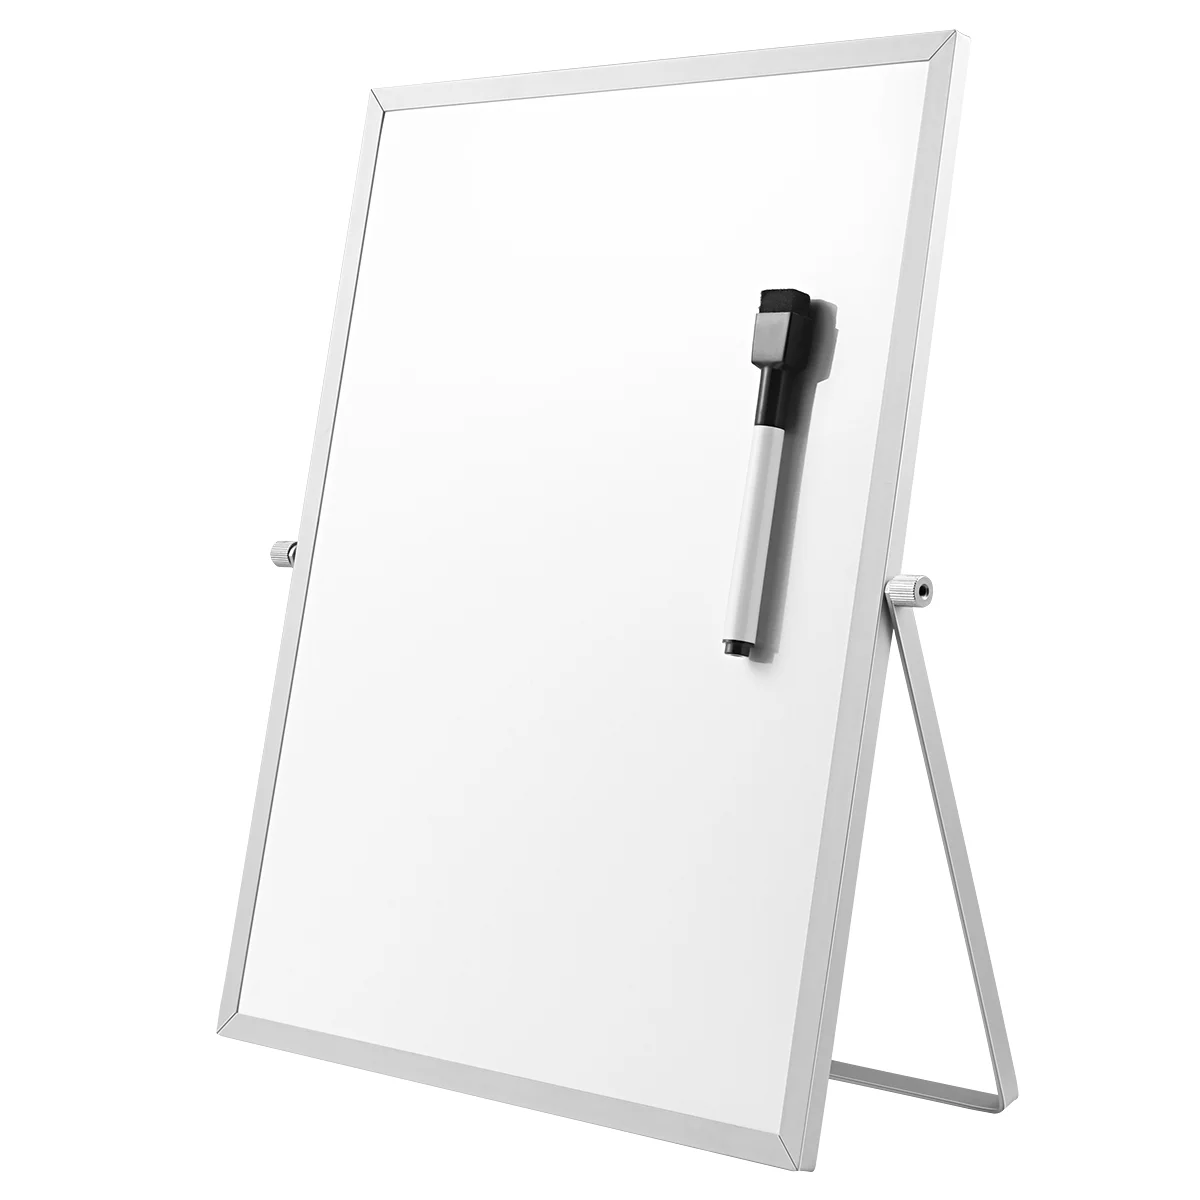 

STOBOK Magnetic Childs Easel Double Sided Personal Desktop Tabletop White Boards For Students Planner Reminder with Stand for